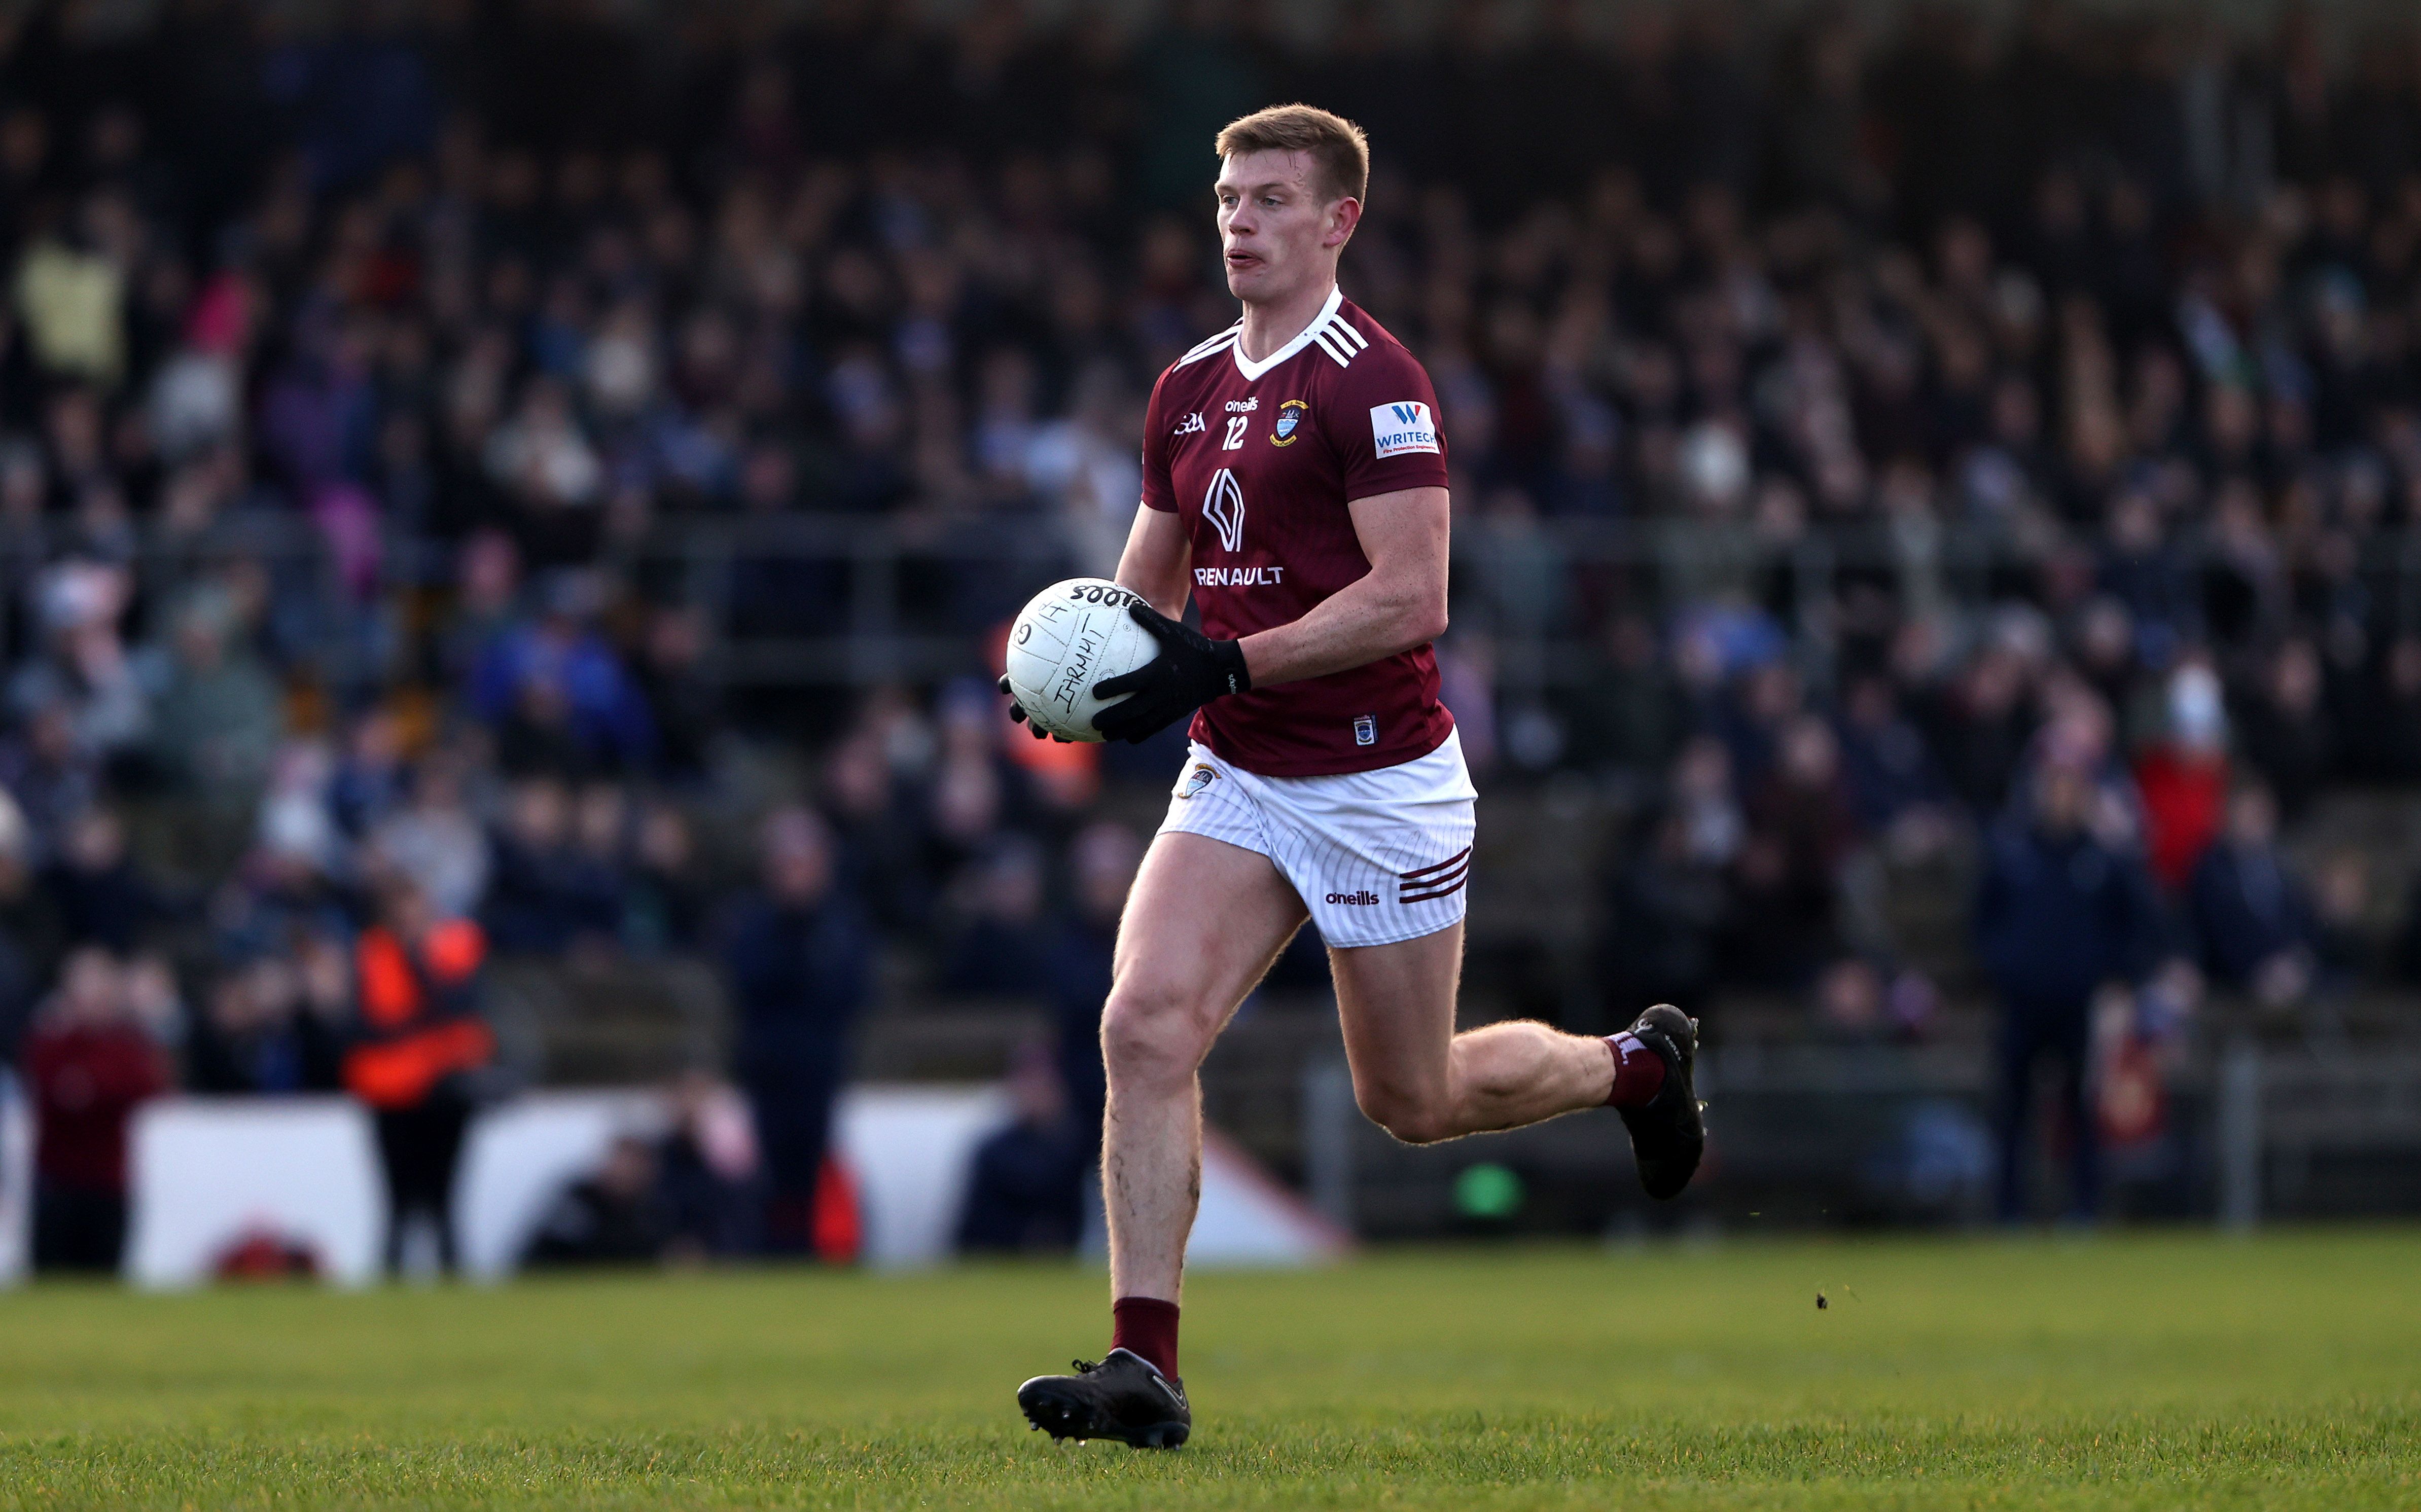 John Heslin top-scored in Westmeath\'s rout over Antrim